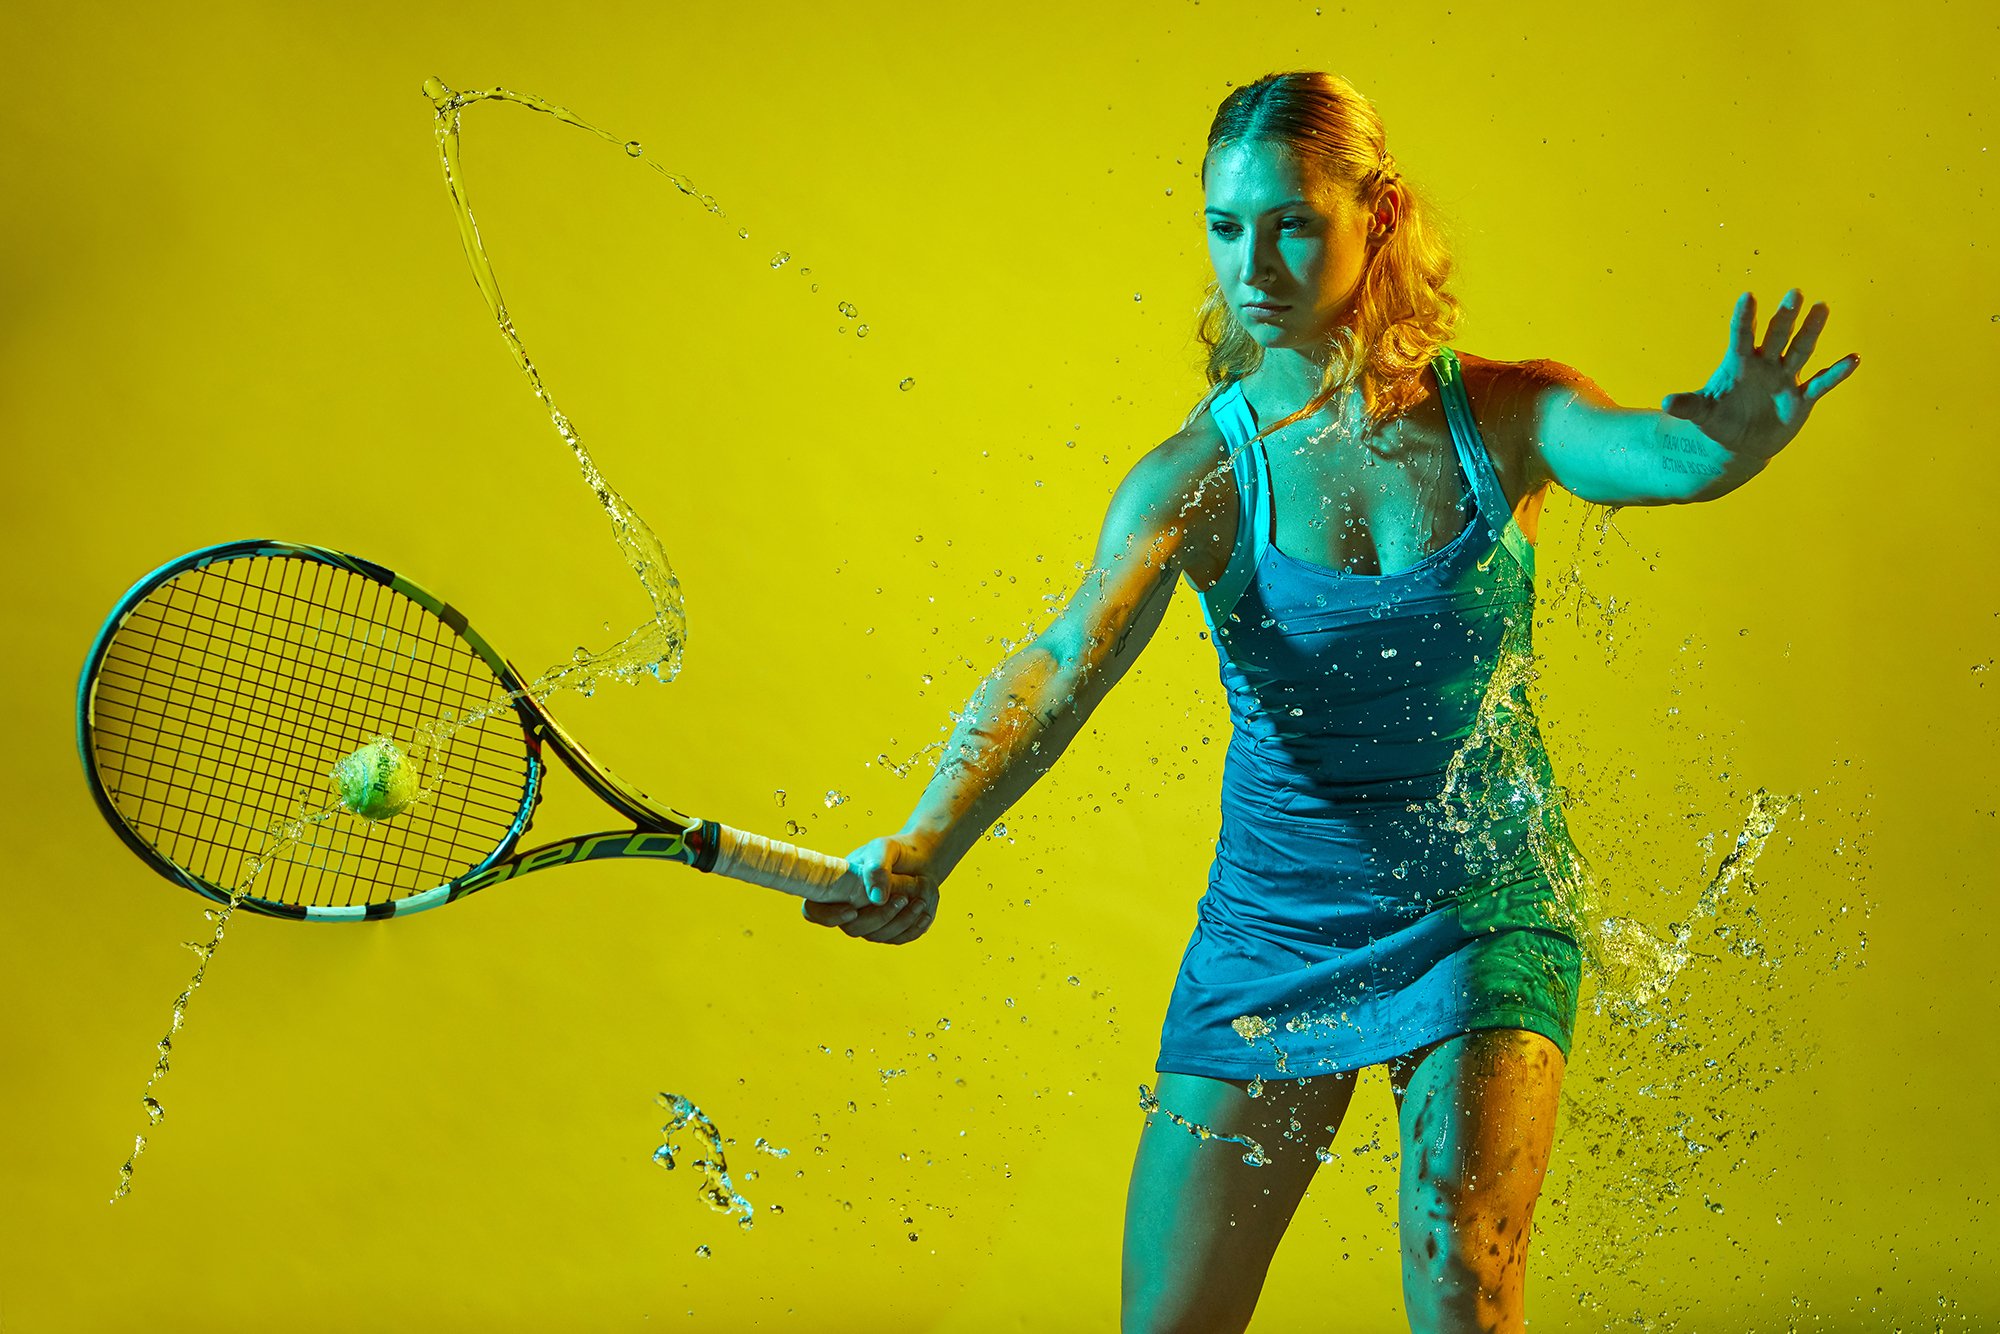 Female tennis player completing forehanded shot while being splashed with water